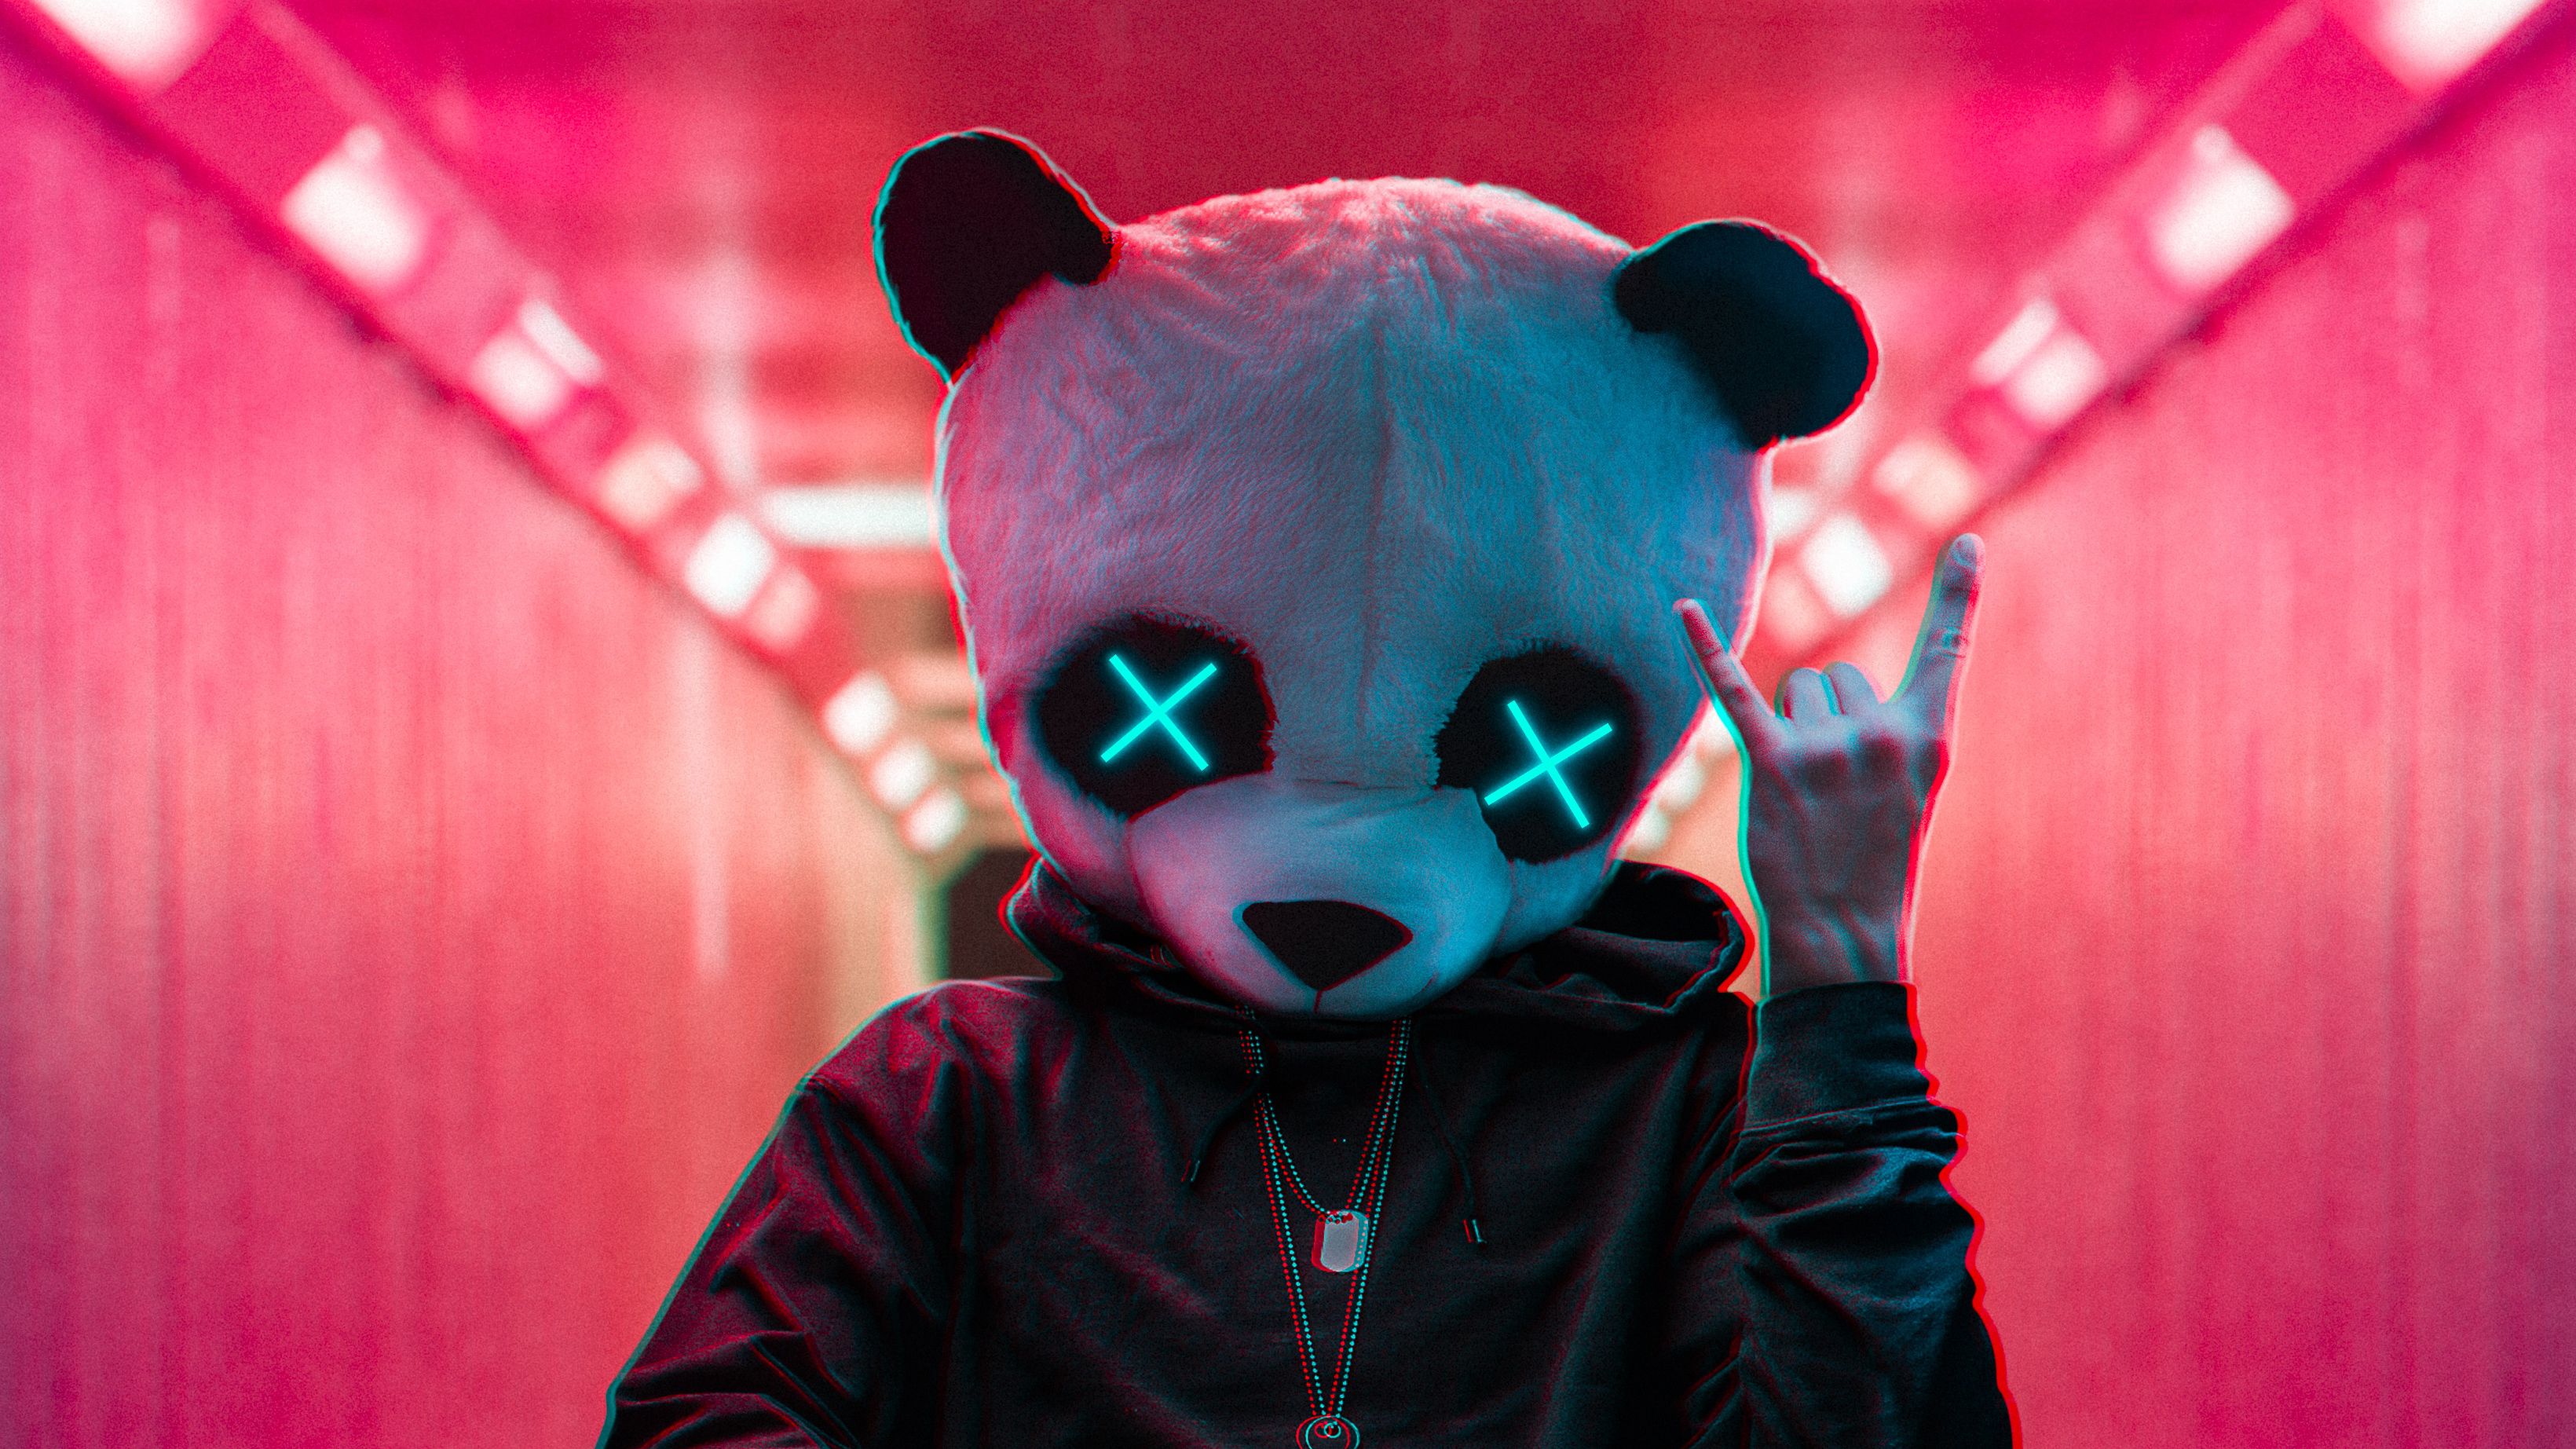 Rockstar Panda 4k, HD Photography, 4k Wallpaper, Image, Background, Photo and Picture